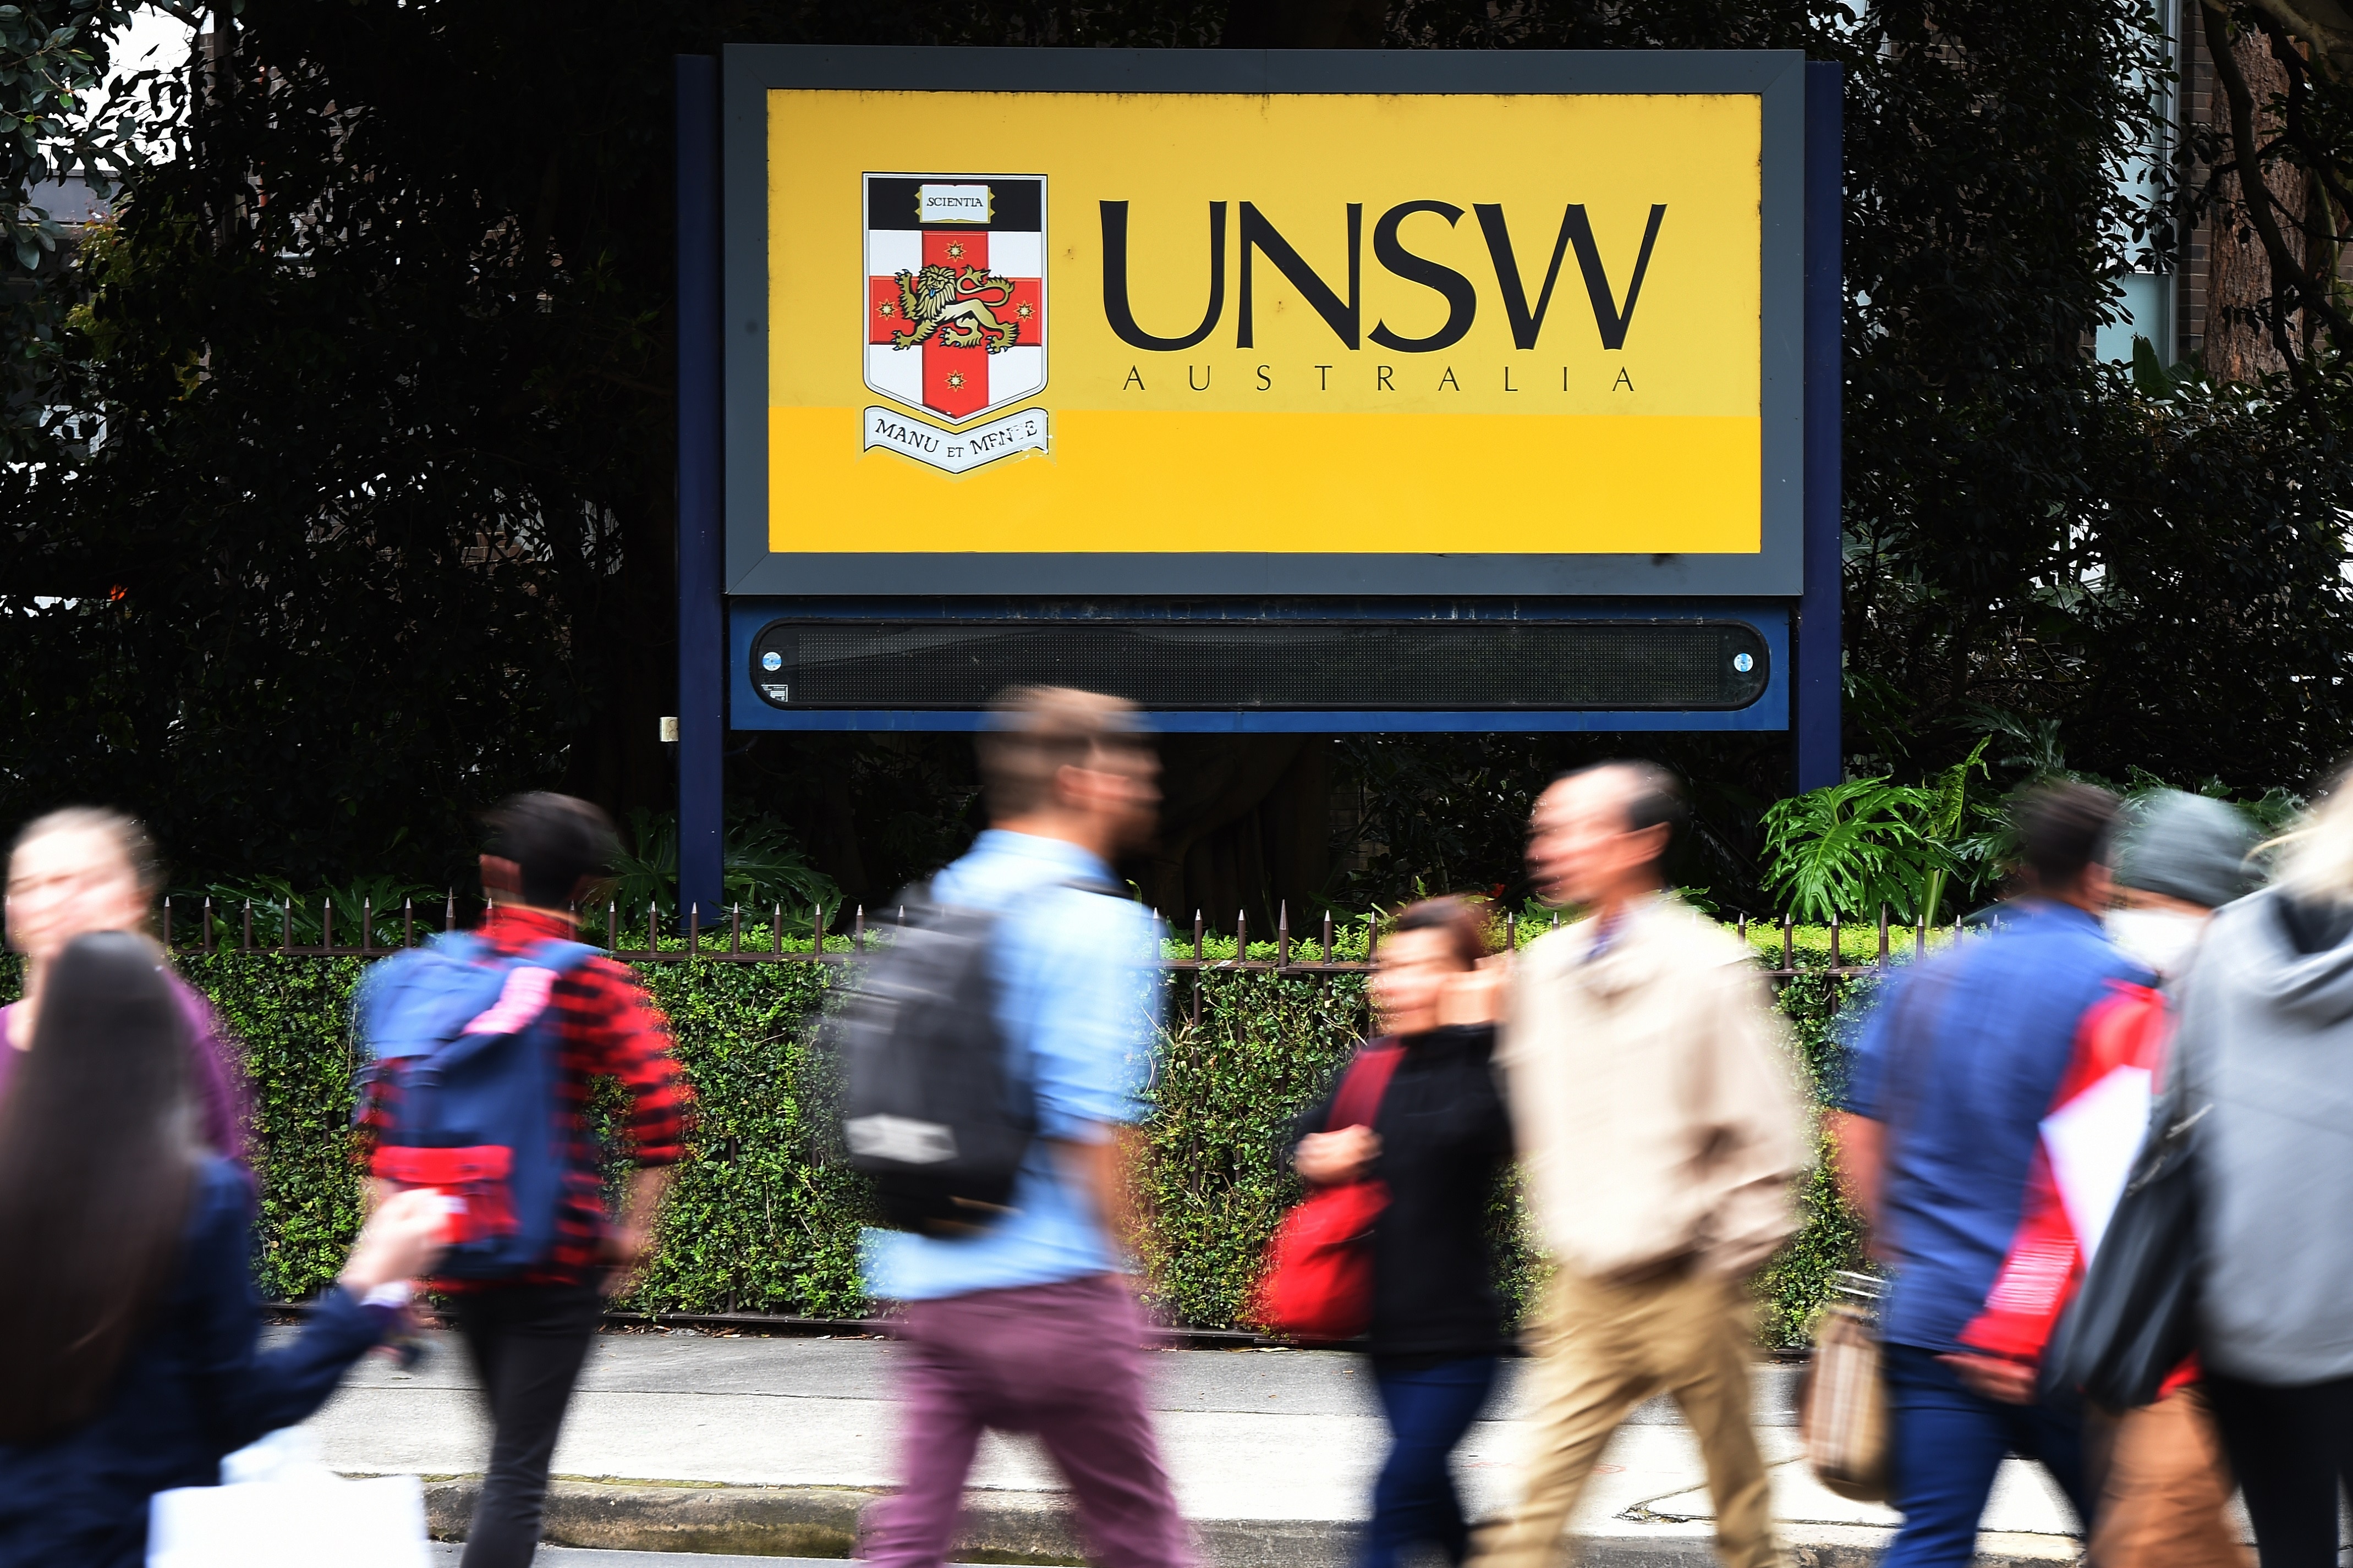 Students enter the University of New South Wales (UNSW) in Sydney.